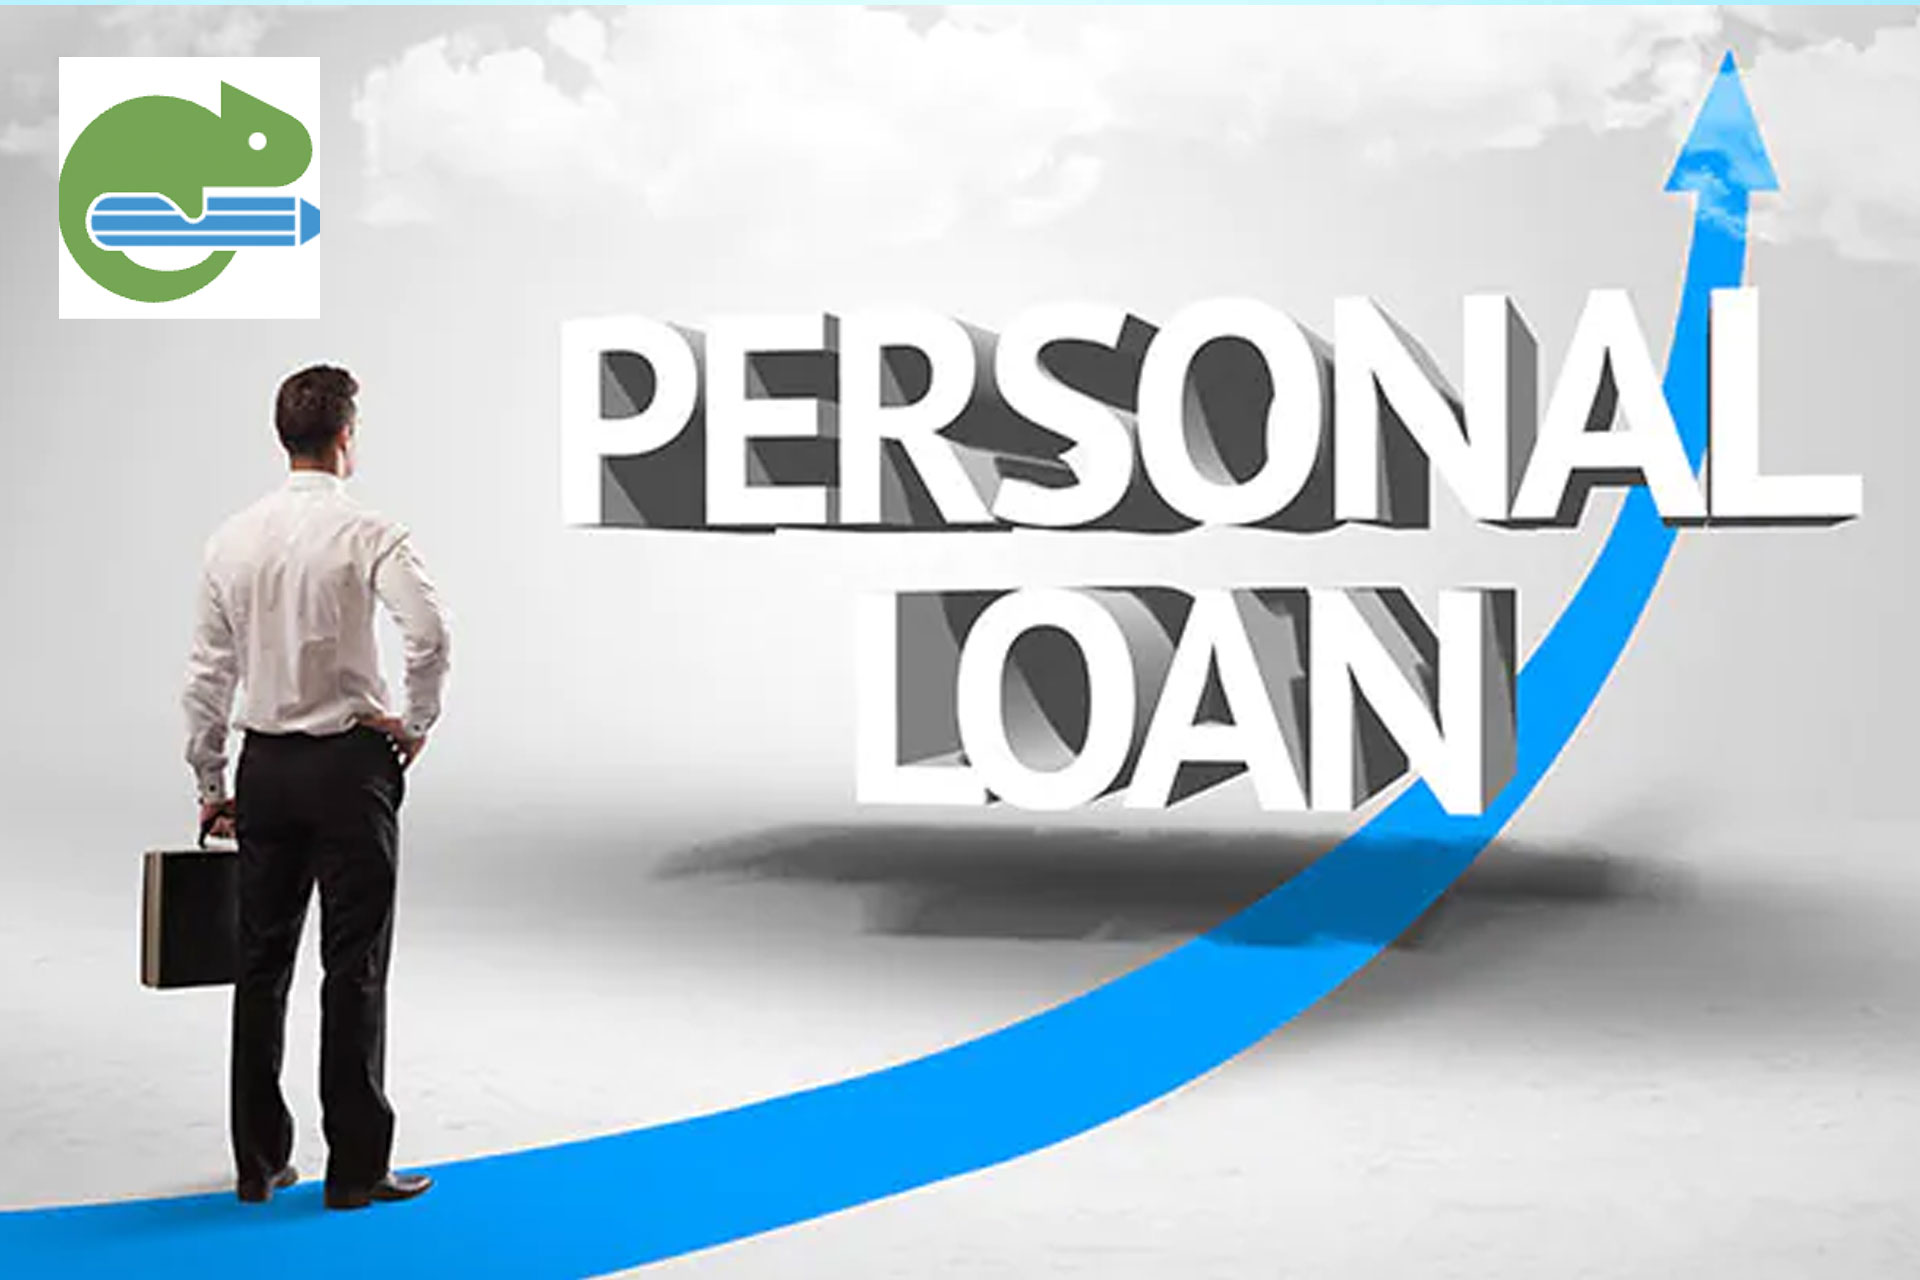 The Do’s and Don’ts for getting Personal Loan